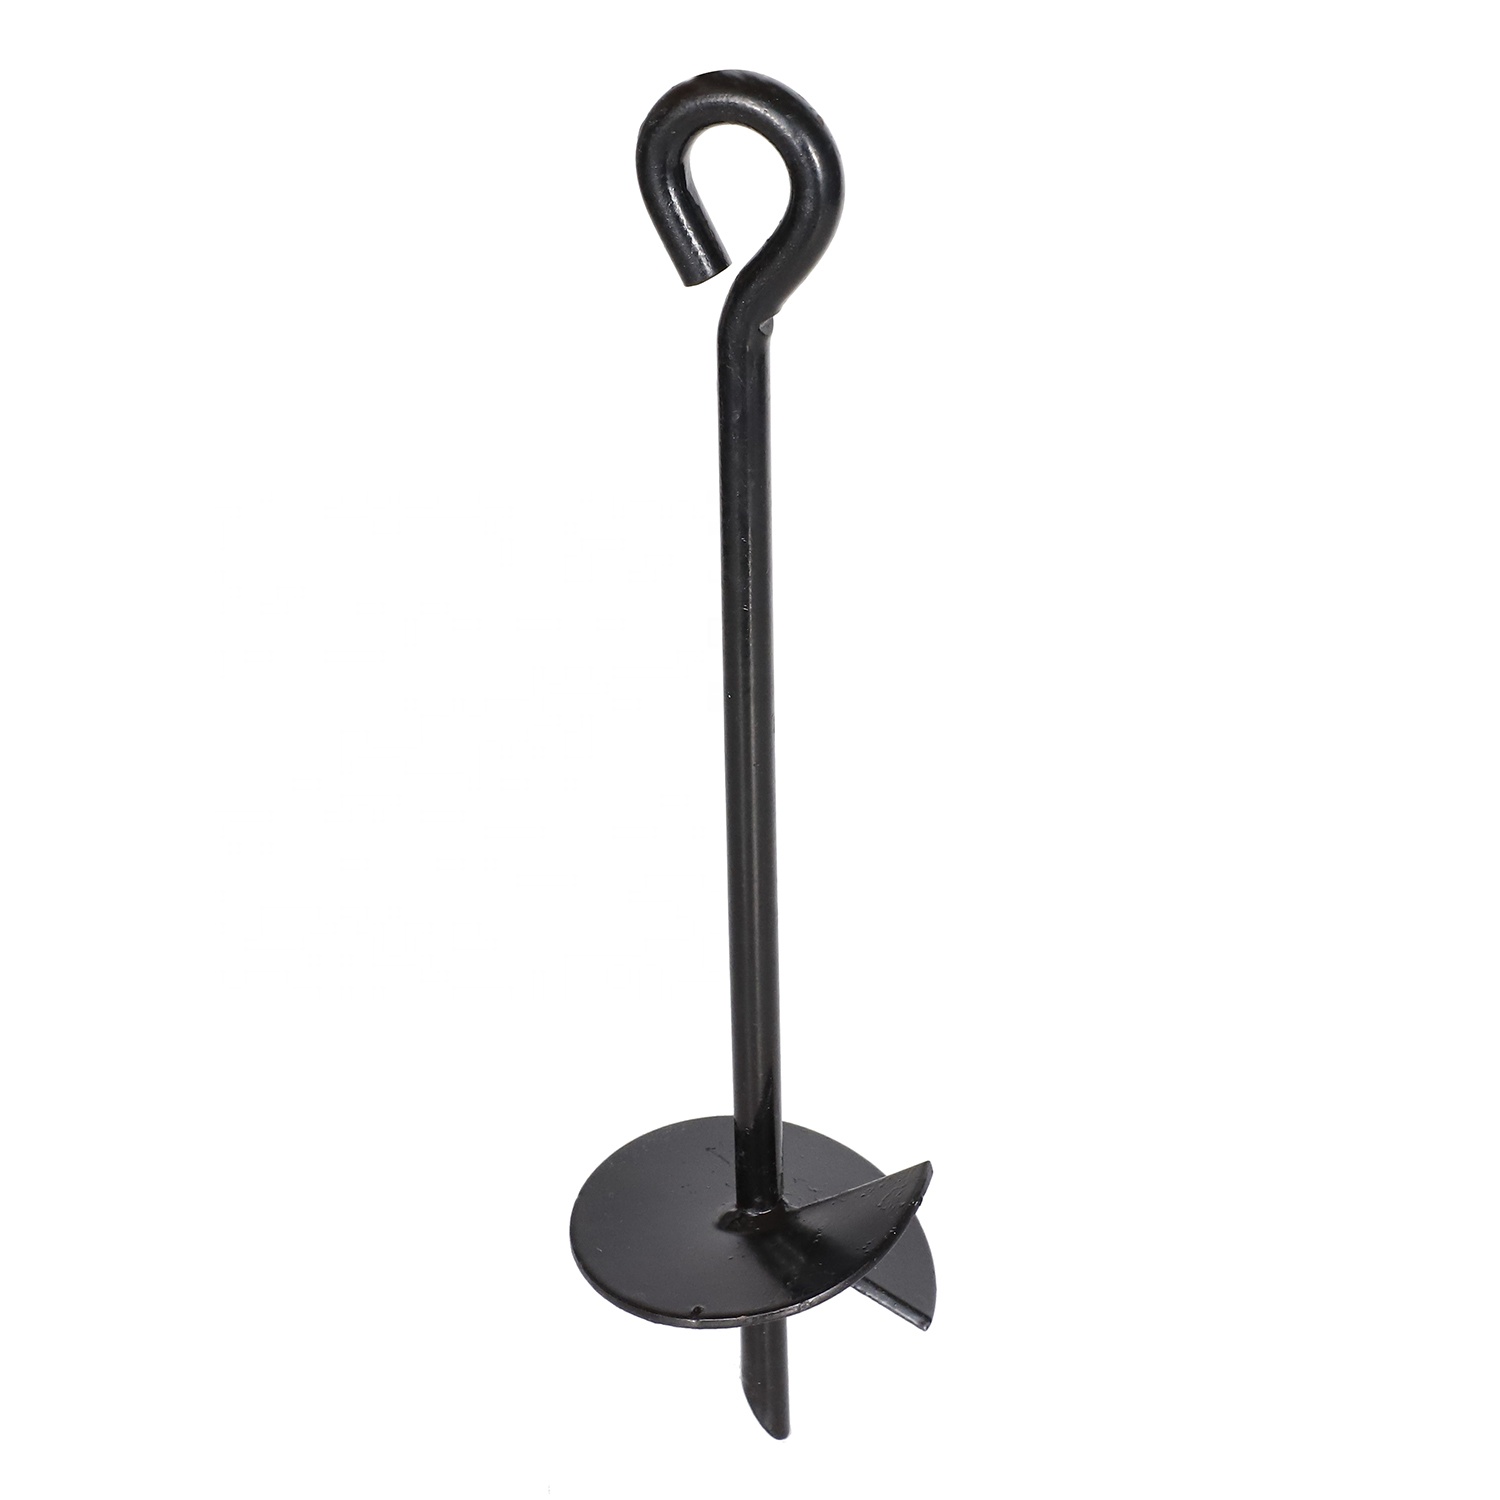 Earth Anchor Screw,Used to Securing Anything in Soil or Sand